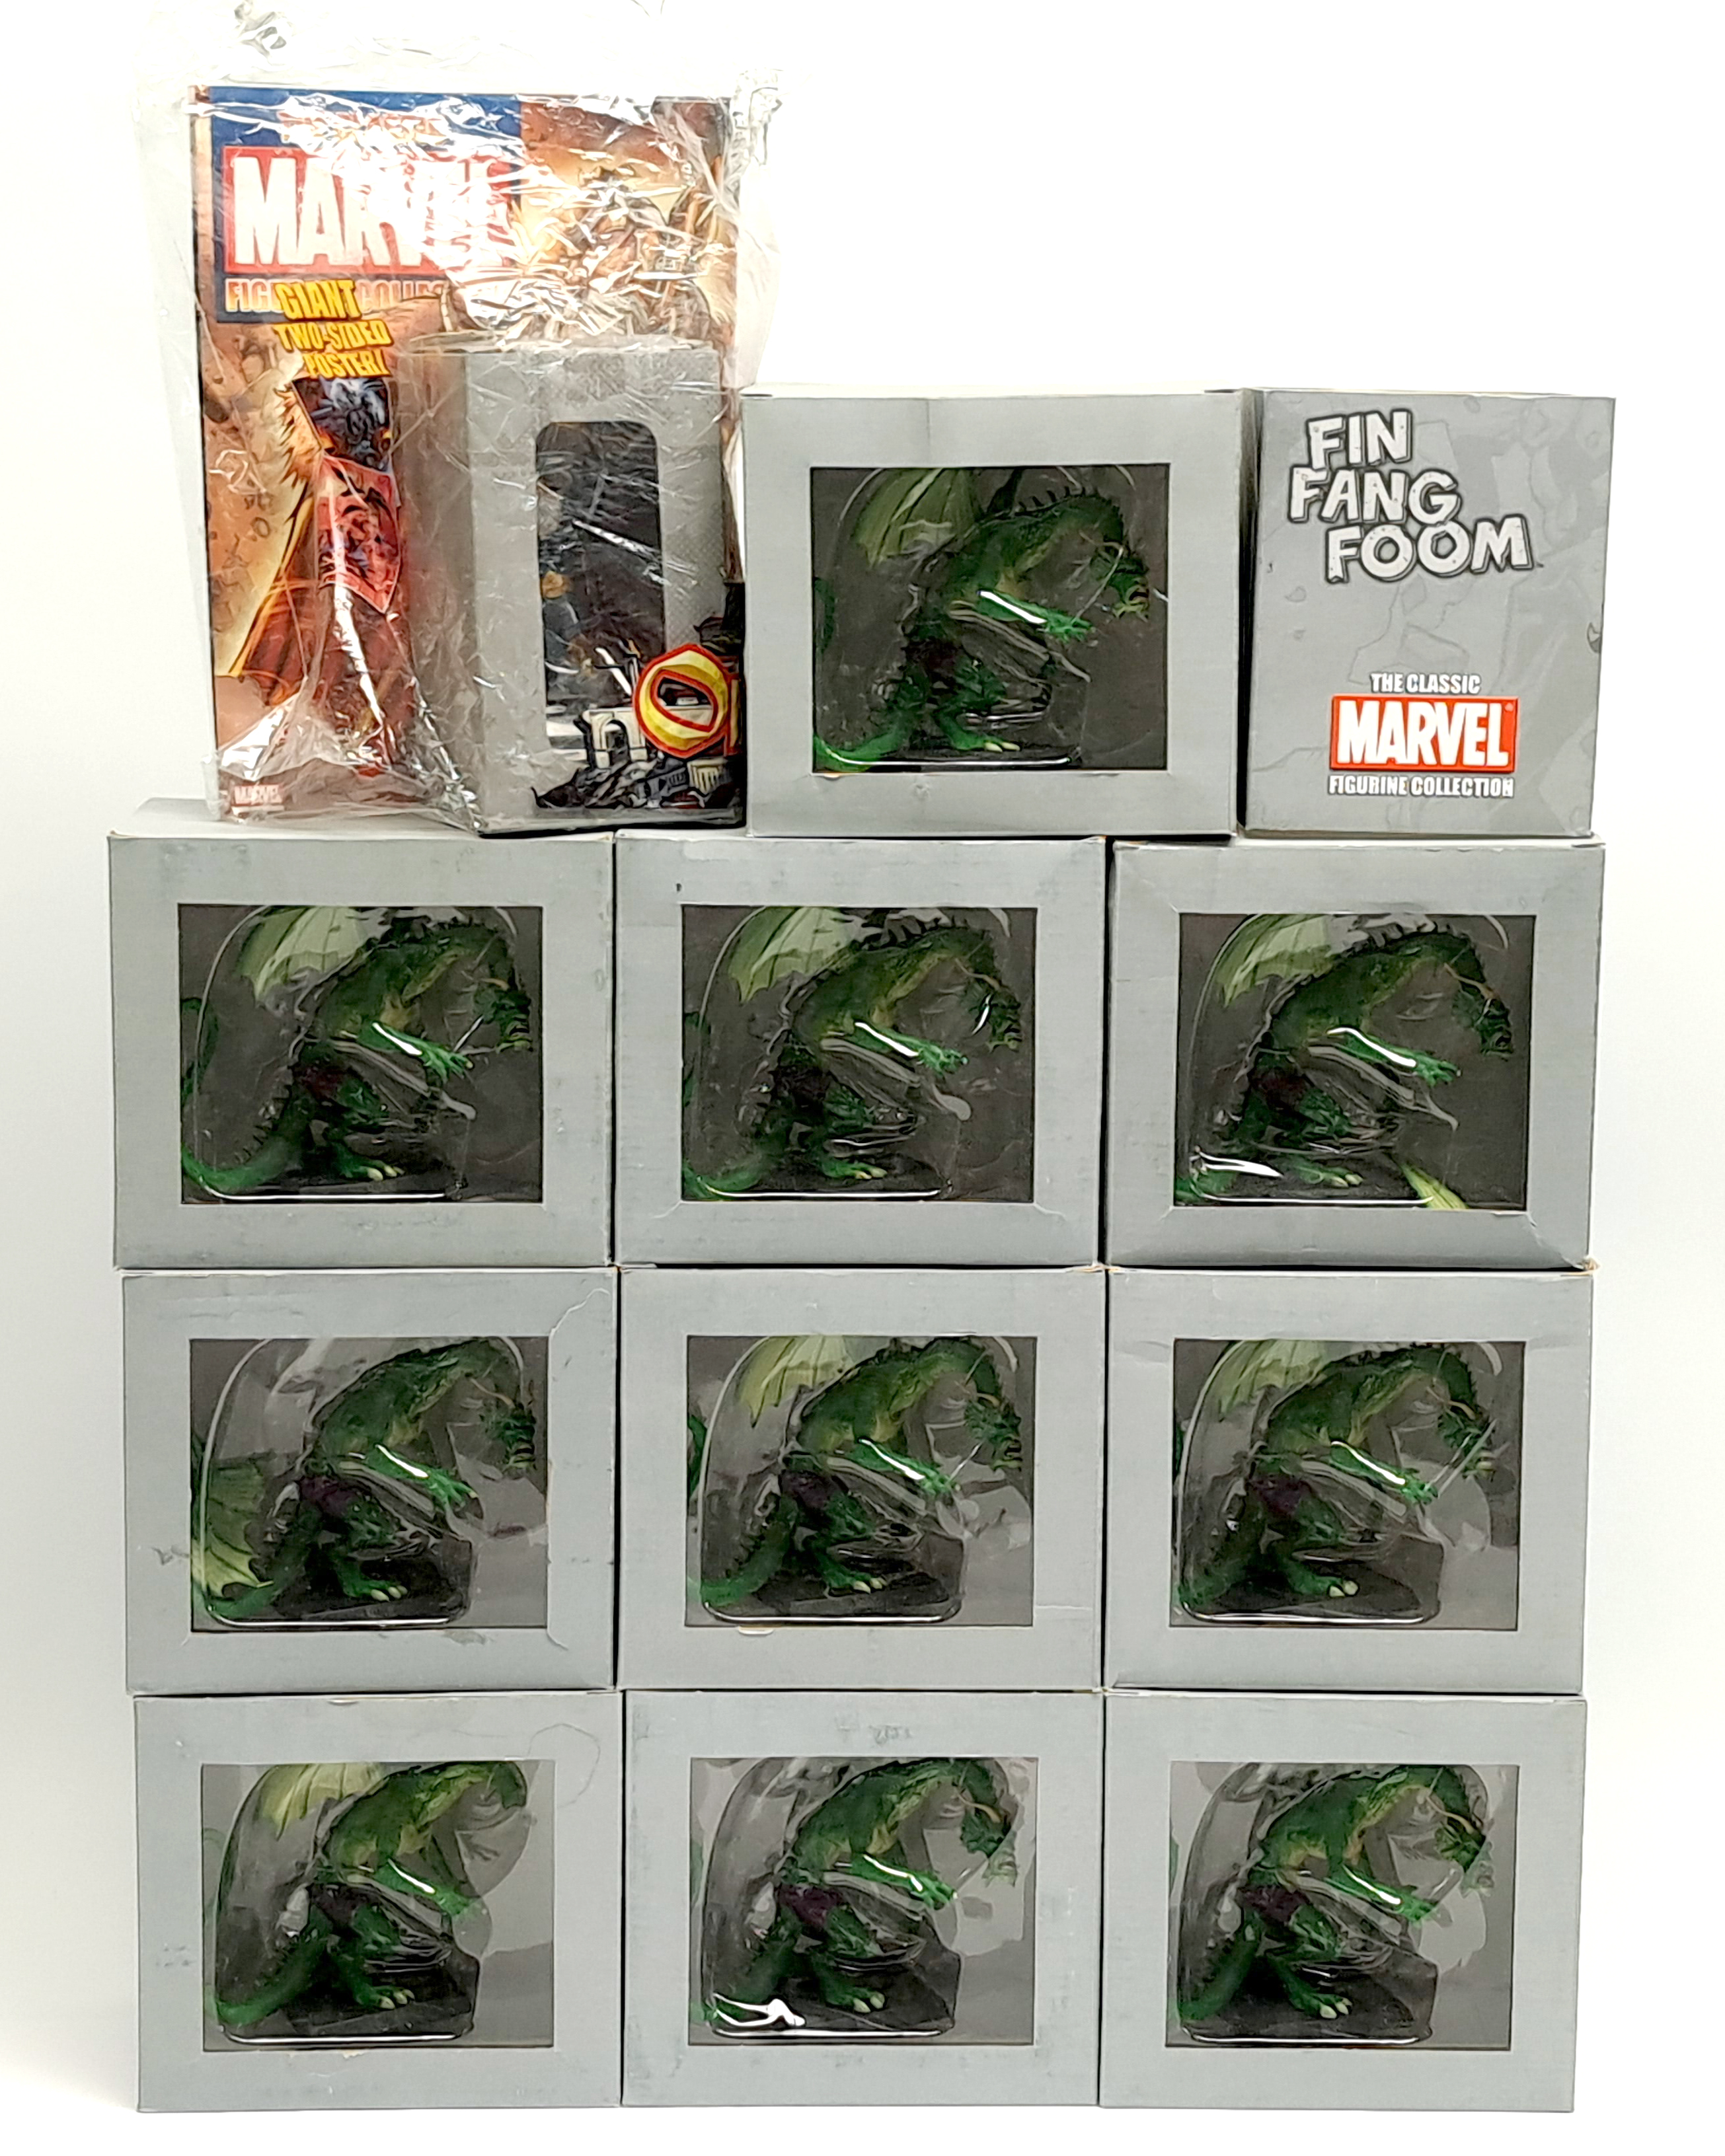 Eaglemoss The Classic Marvel Figurine Collection Fin Fang Foom figurines